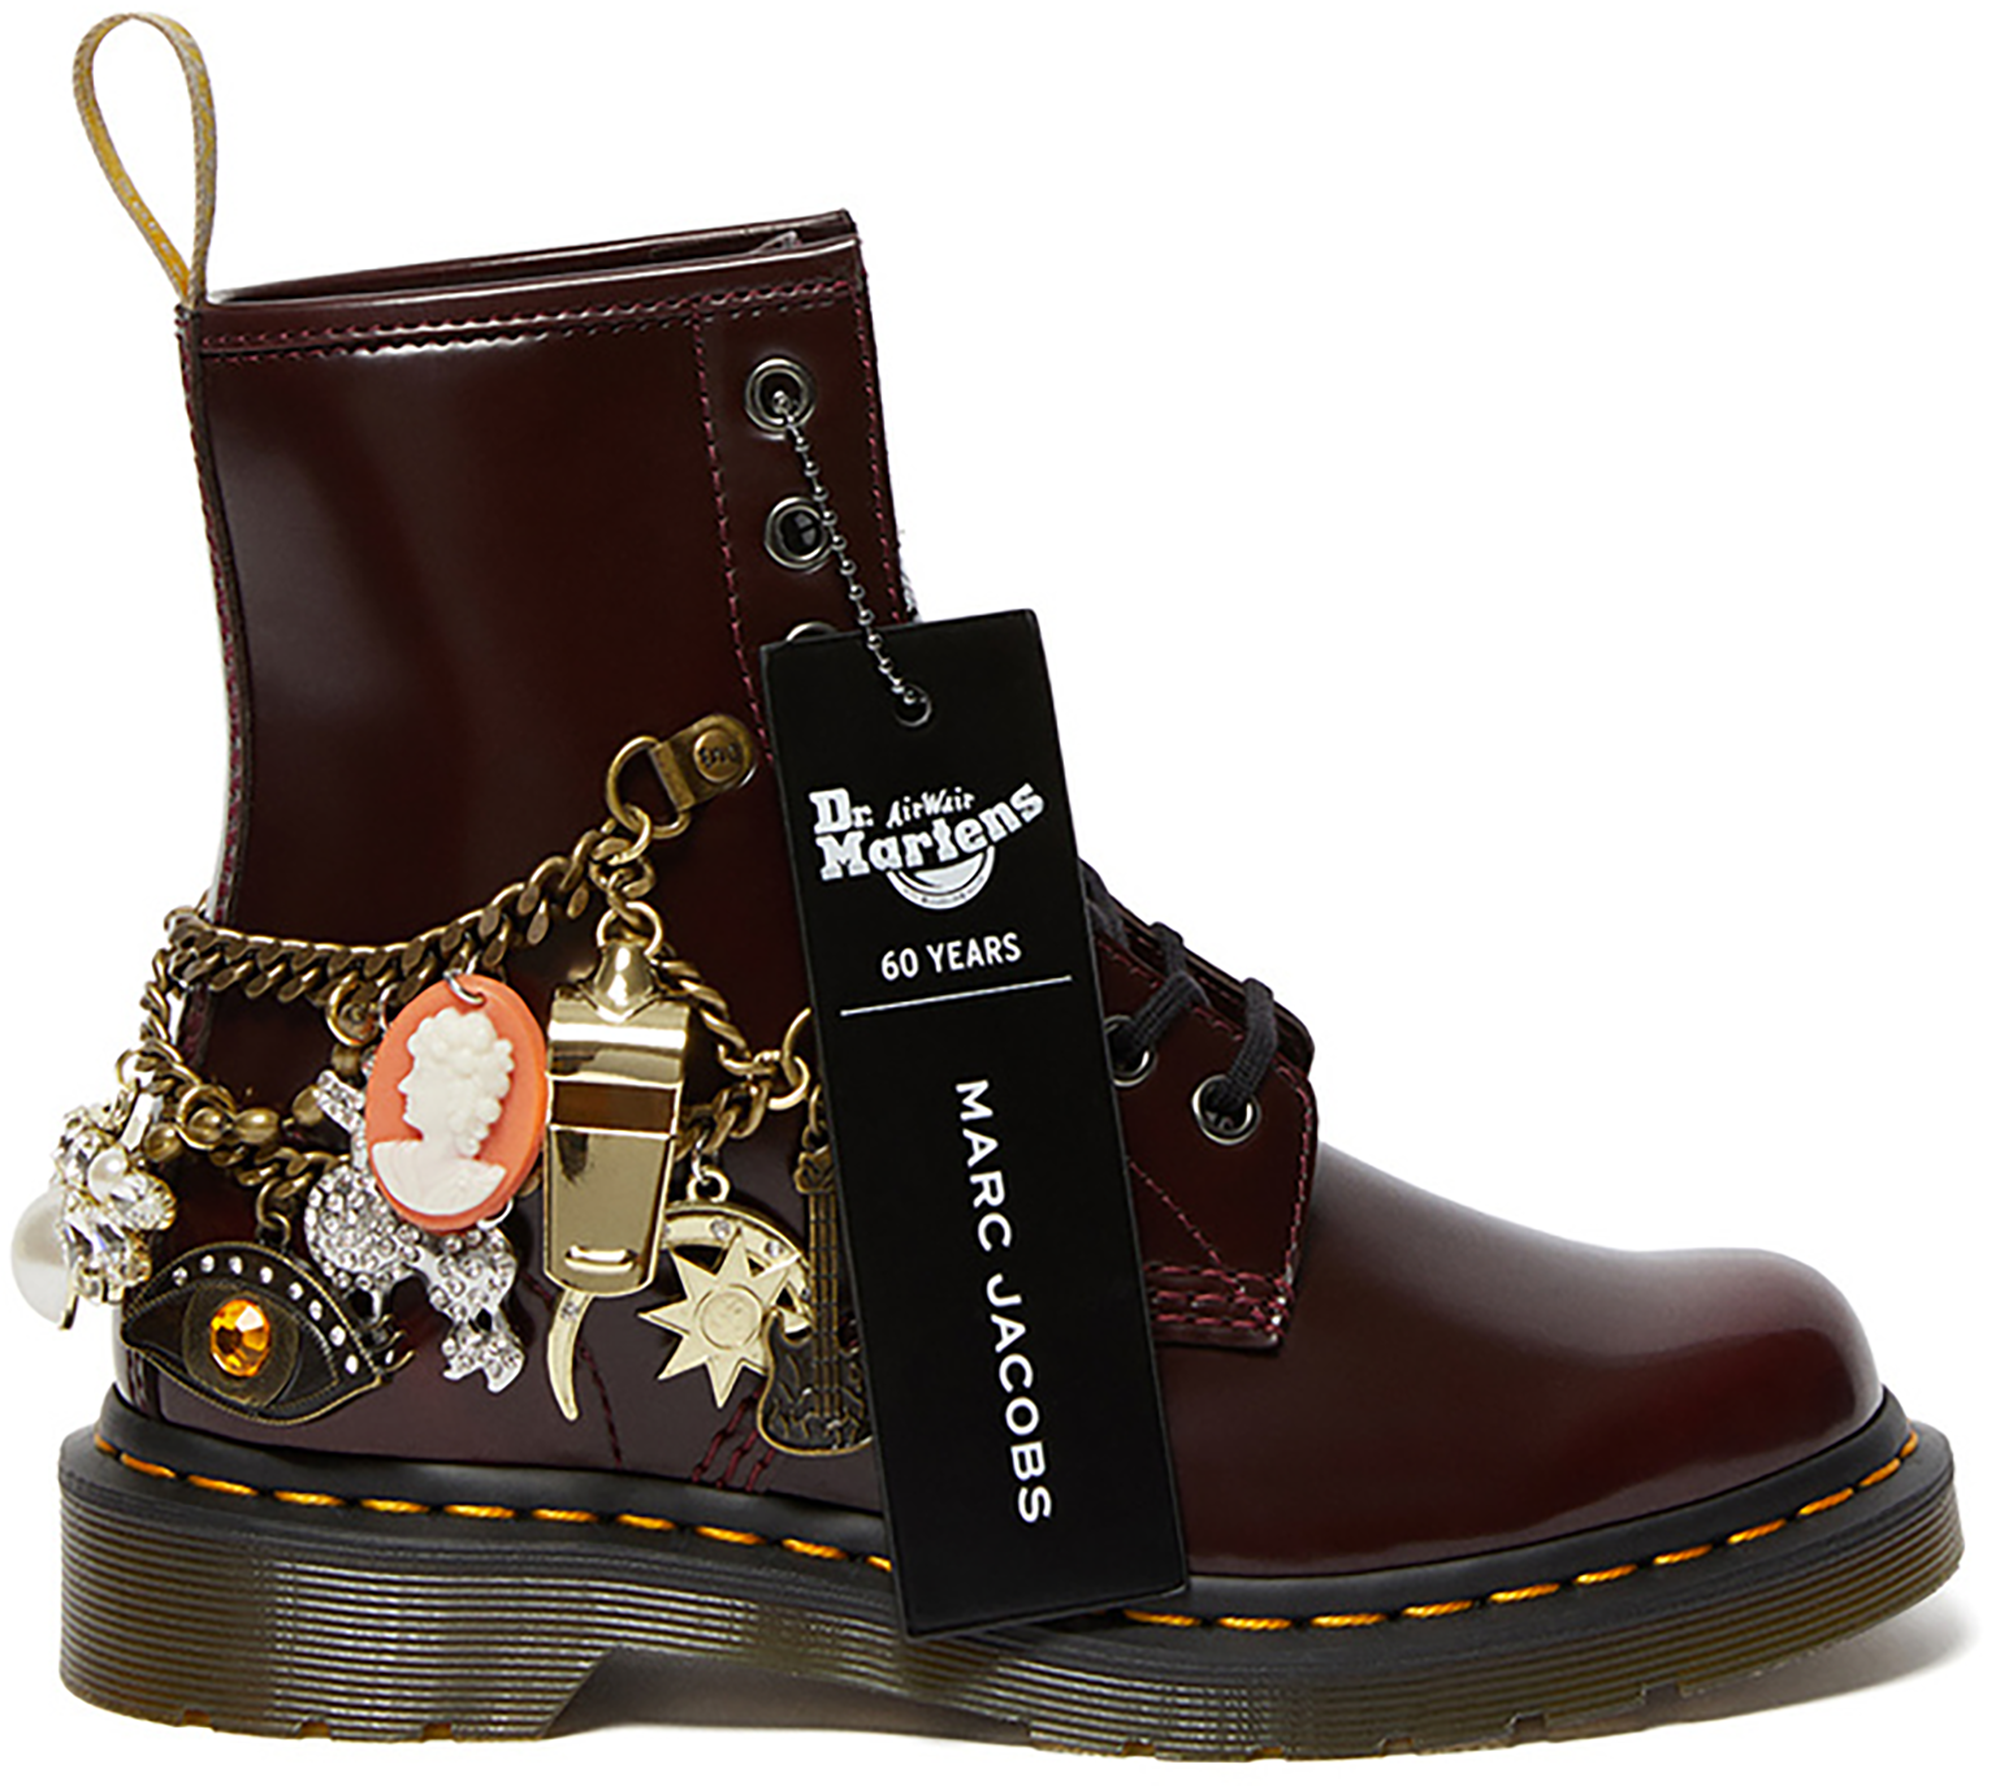 who sells doc martens shoes